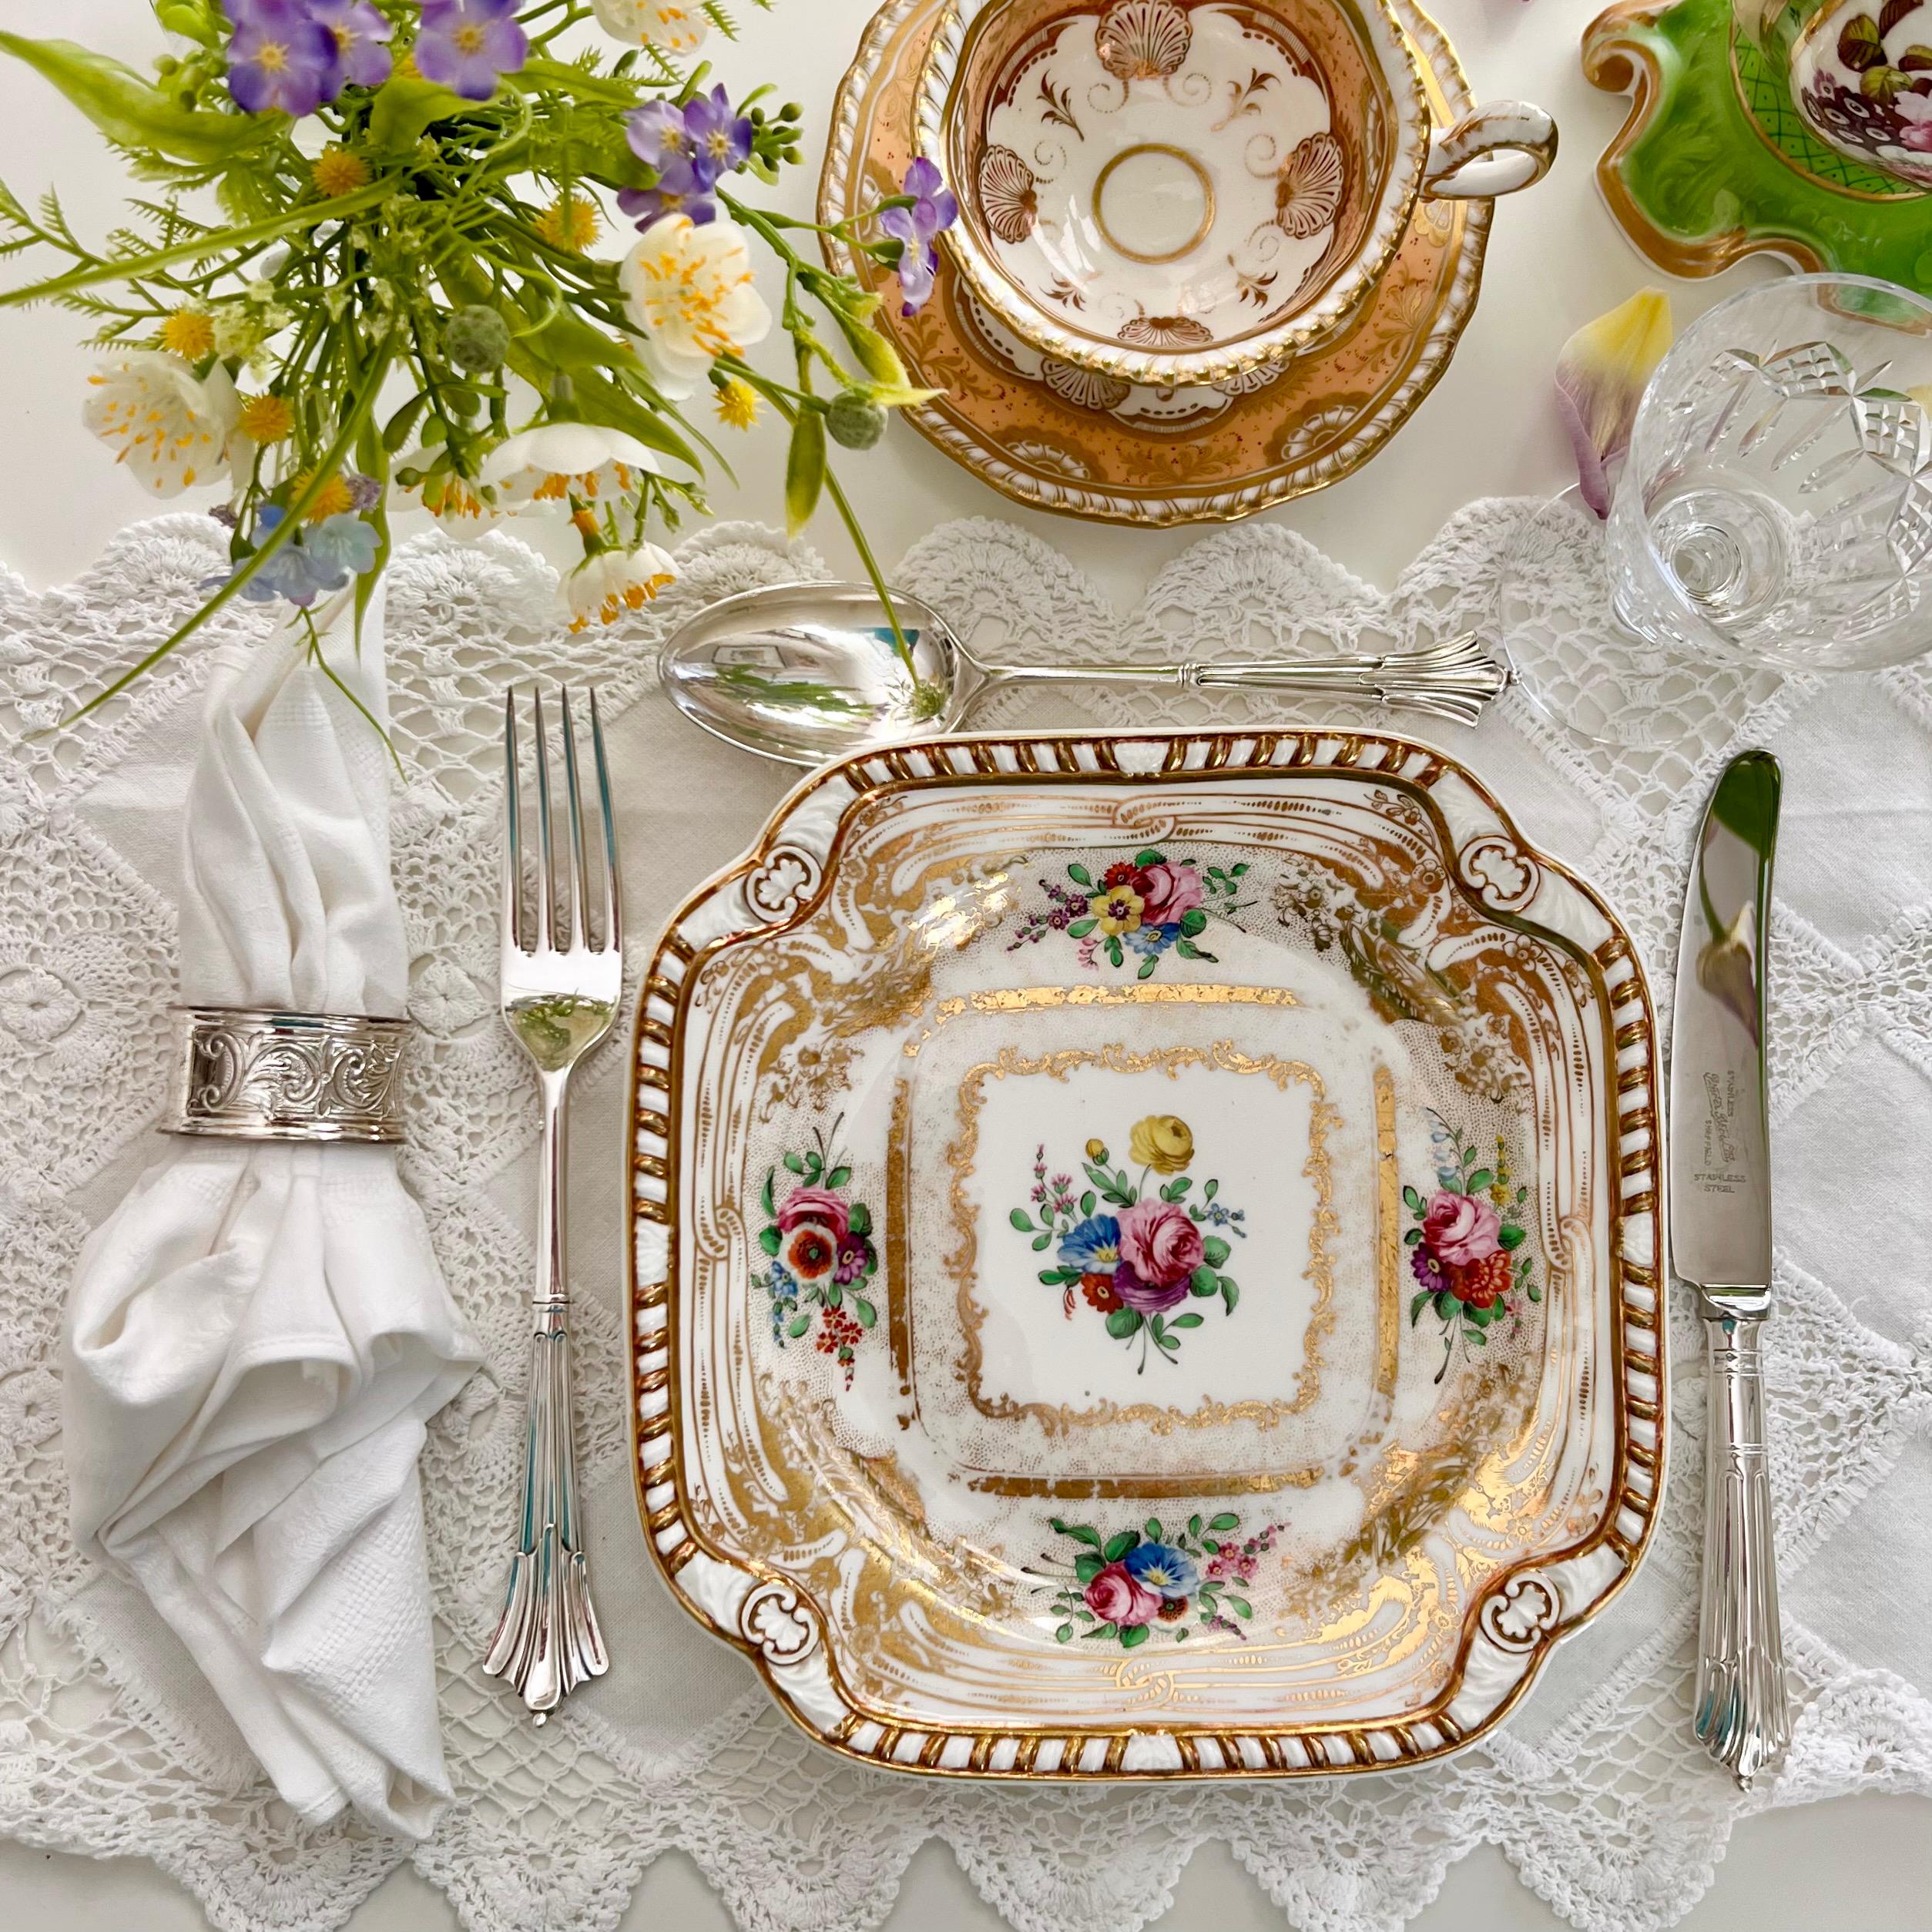 This is beautiful square dessert plate made by Spode around the year 1824. The set was made in the famous Spode Felspar china, which was a bright porcelain that included felspar rock, making it exceptionally robust and very suitable for large table